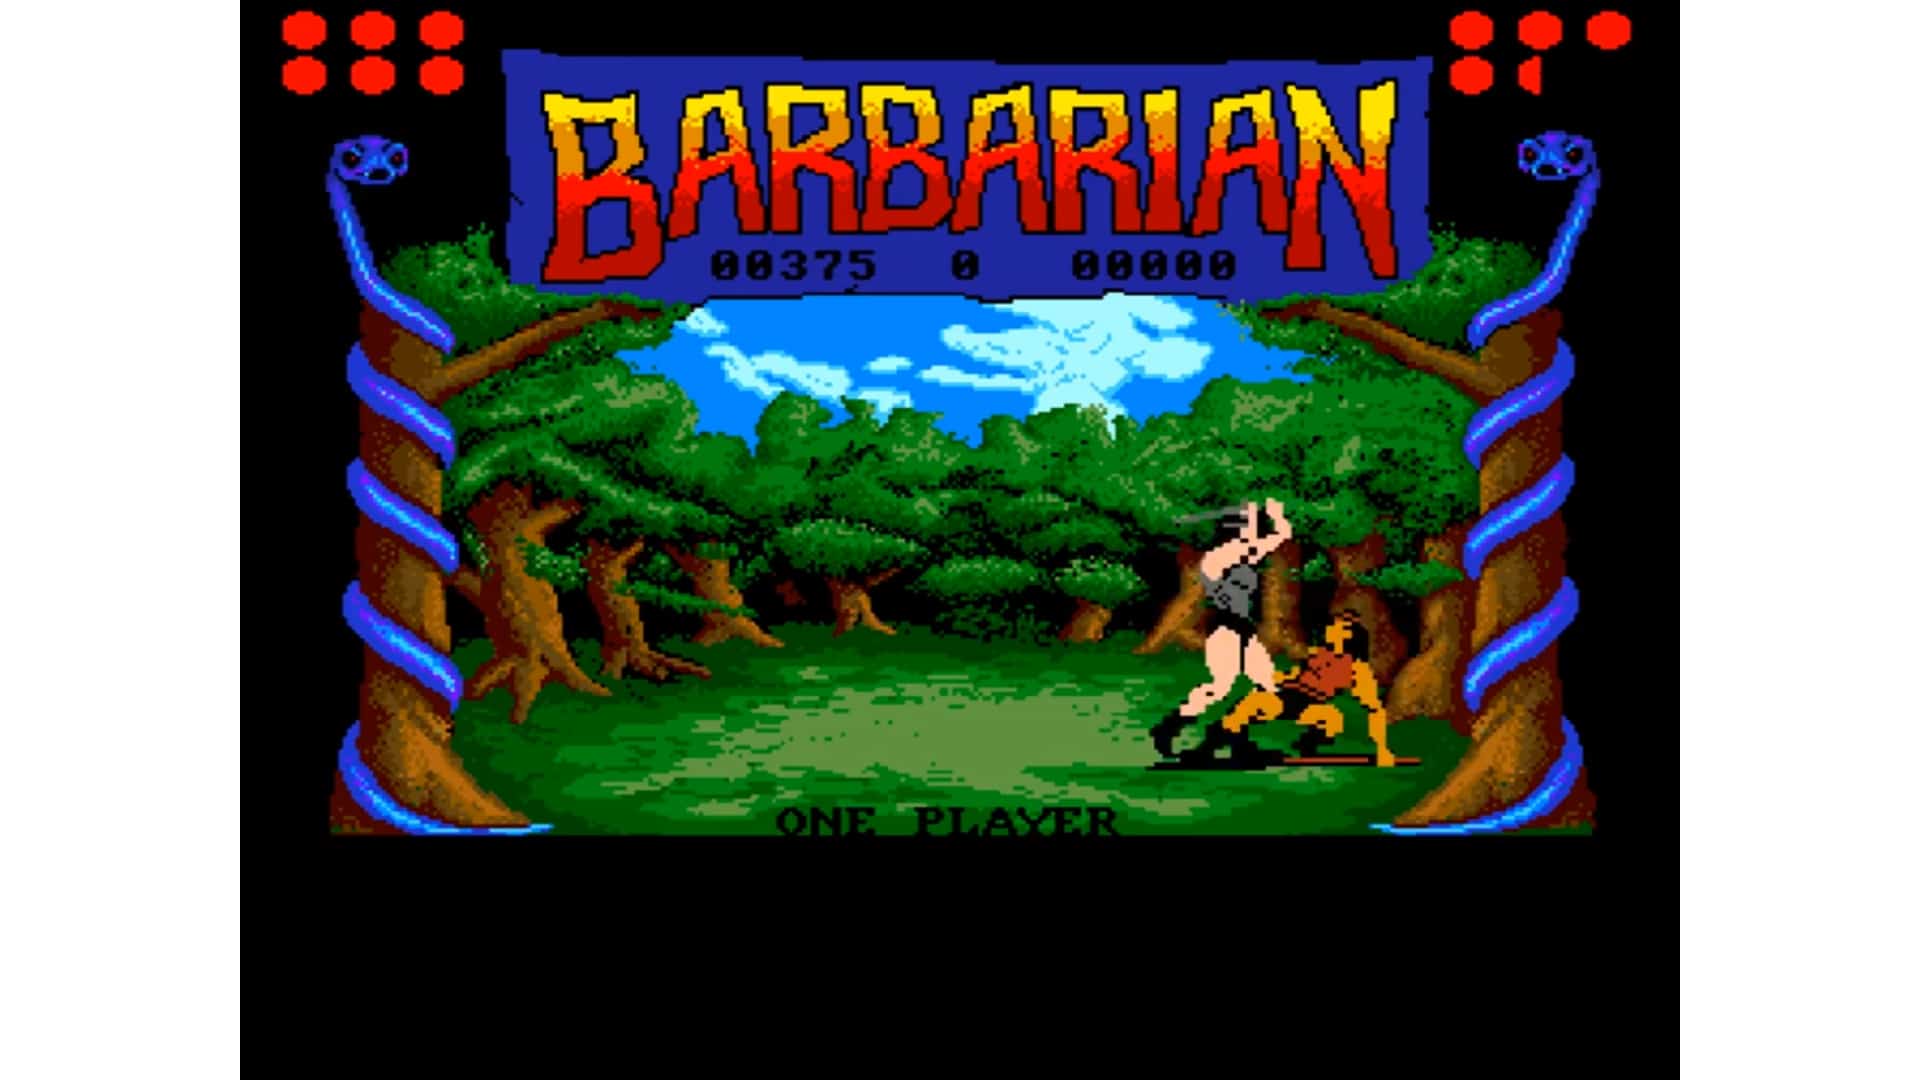 An in-game screenshot from Barbarian: The Ultimate Warrior.